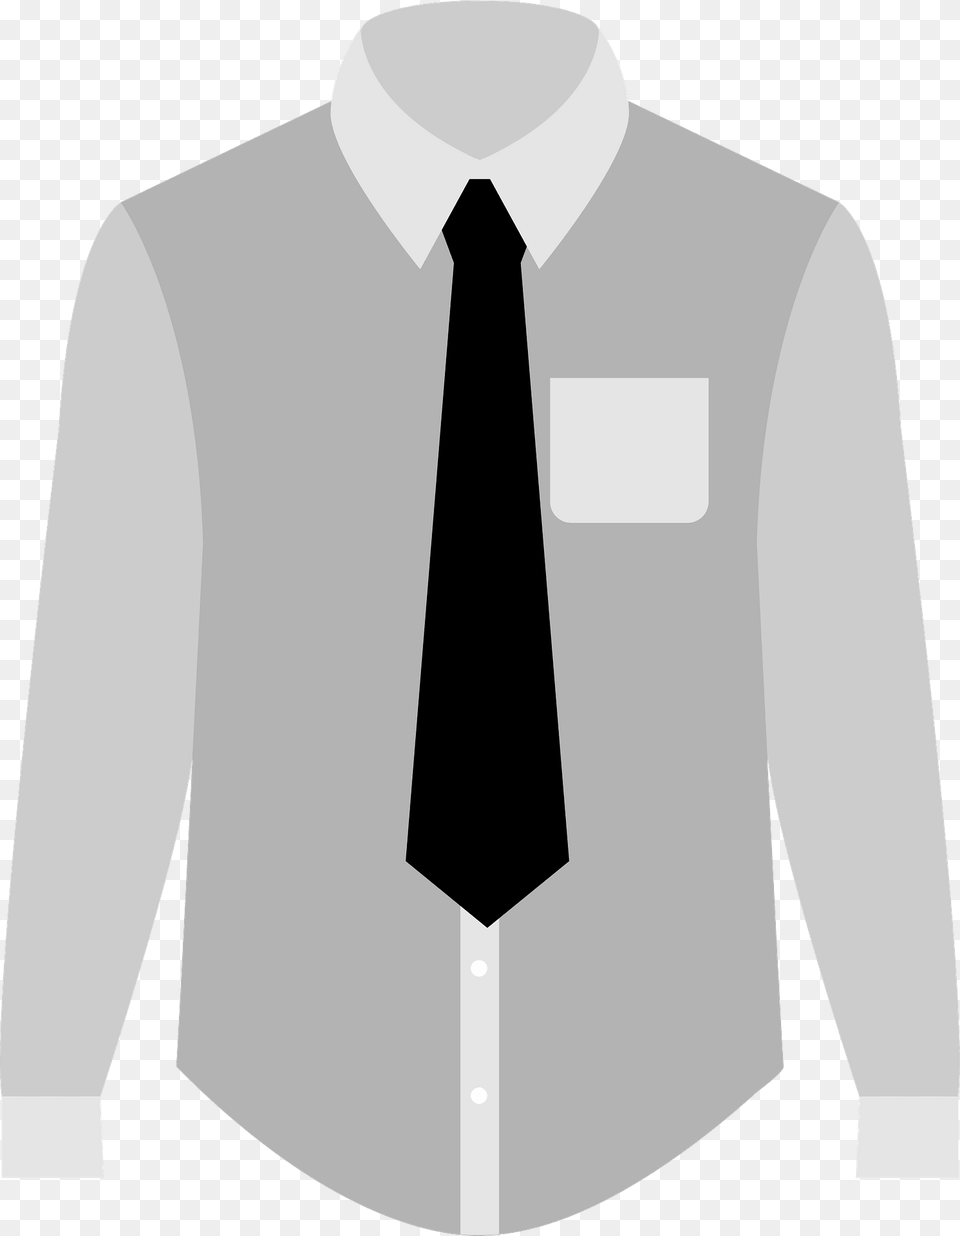 Dress Shirt And Necktie Grayscale Clipart, Accessories, Tie, Formal Wear, Dress Shirt Free Transparent Png